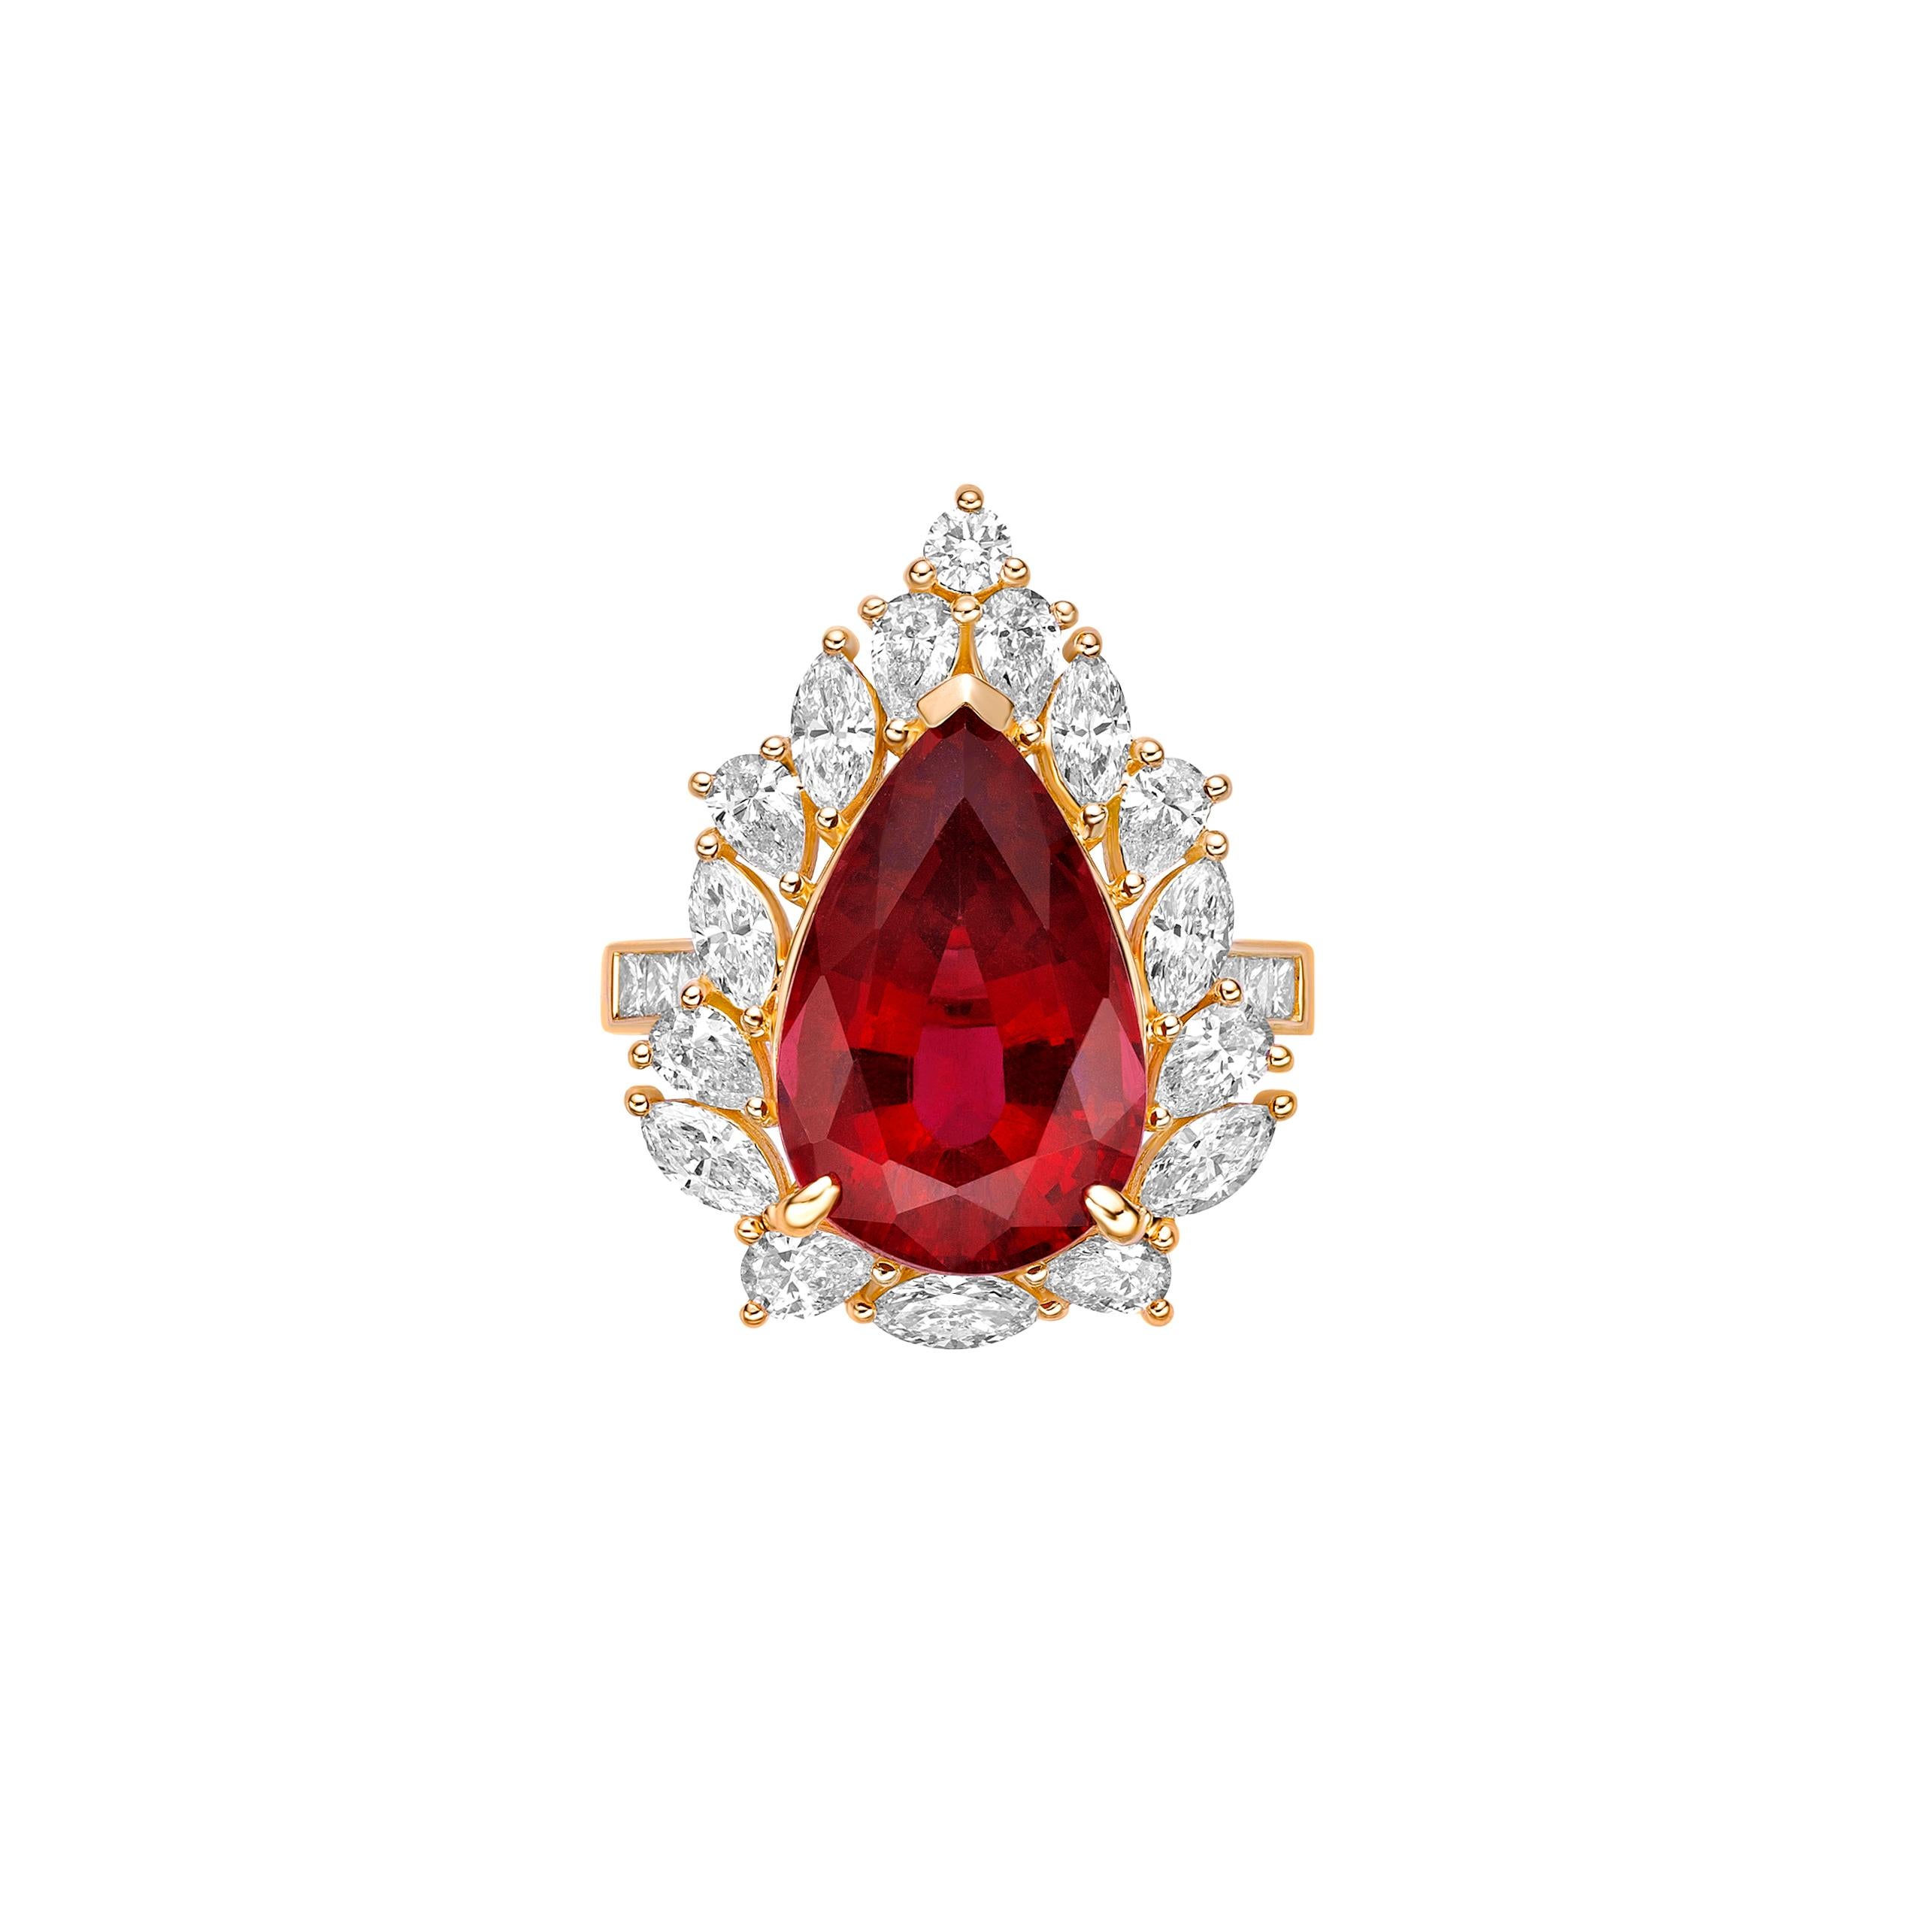 Contemporary 7.784 Carat Rubelite Fancy Ring in 18Karat Yellow Gold with White Diamond. For Sale